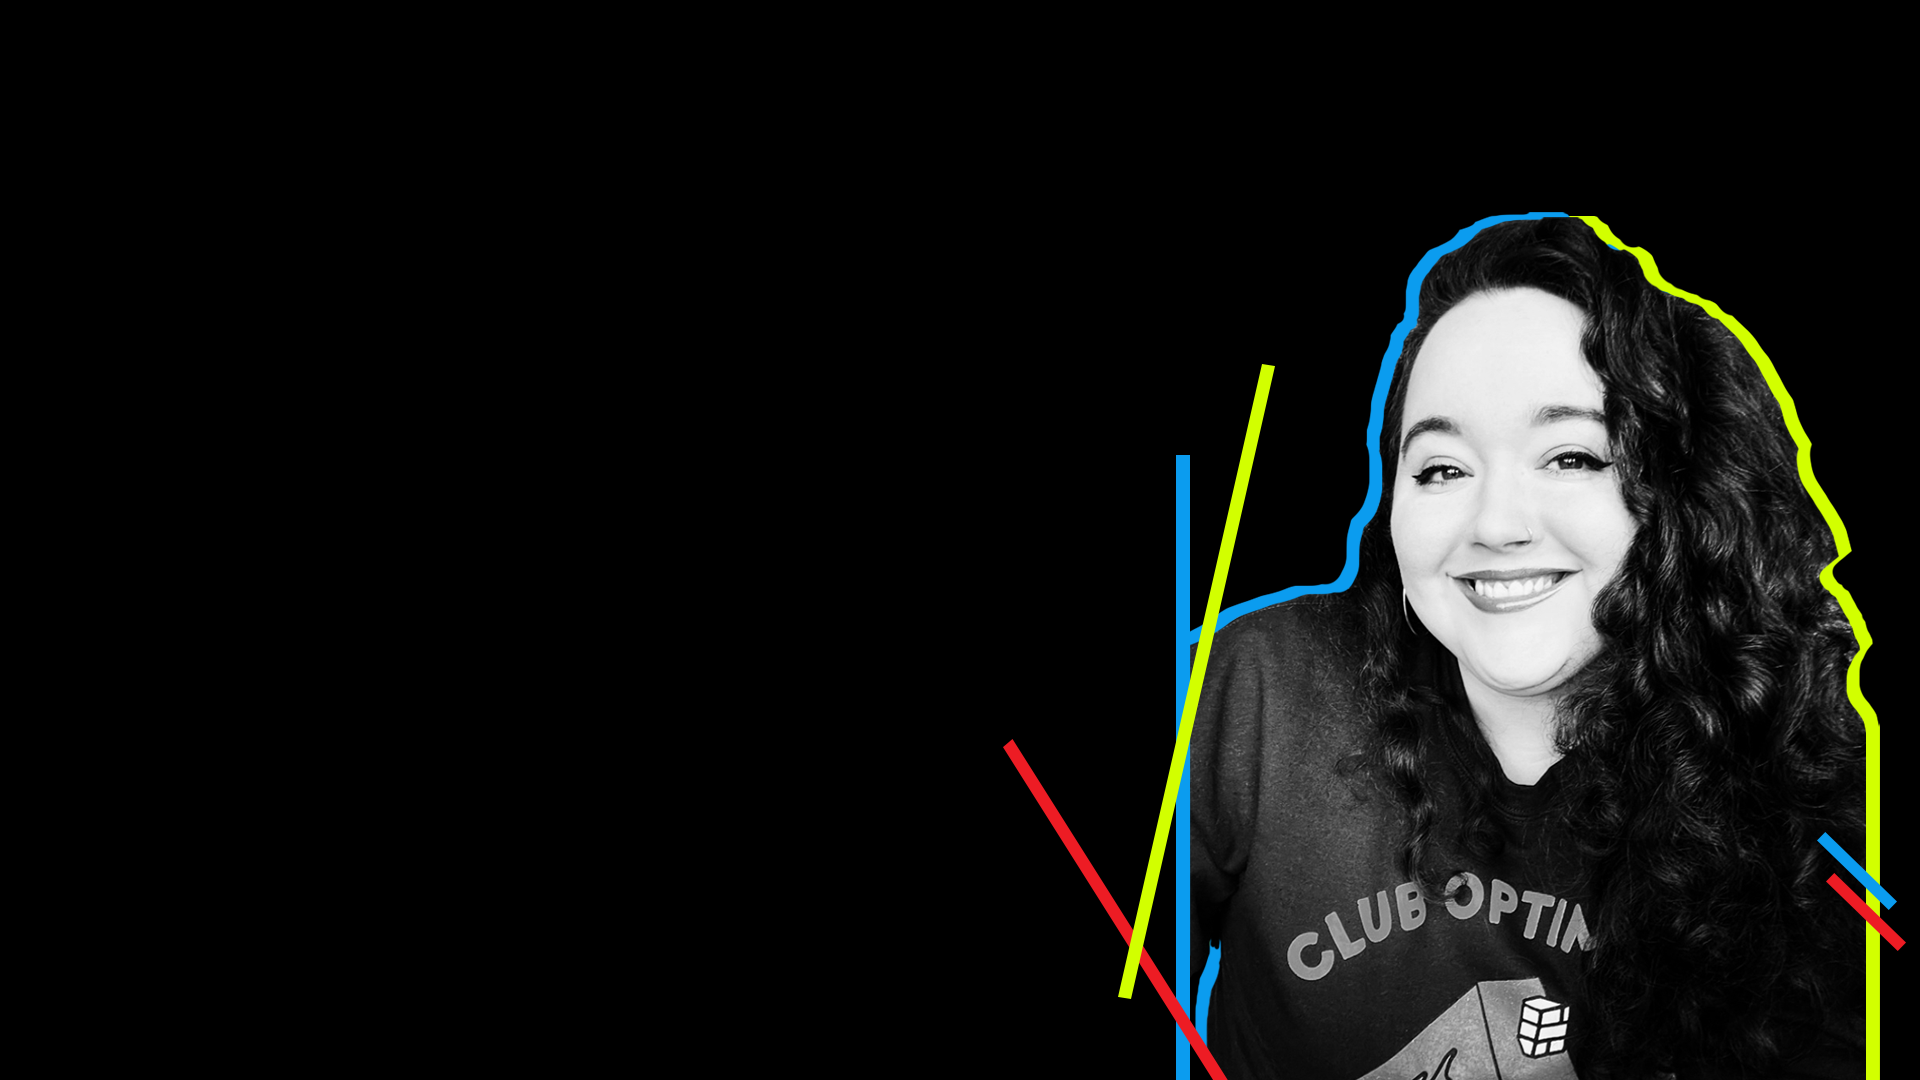 Background of me smiling with my brown curly hair down wearing a sweater that reads Club Optimiste. Colorful lines are surrounding me for decoration.